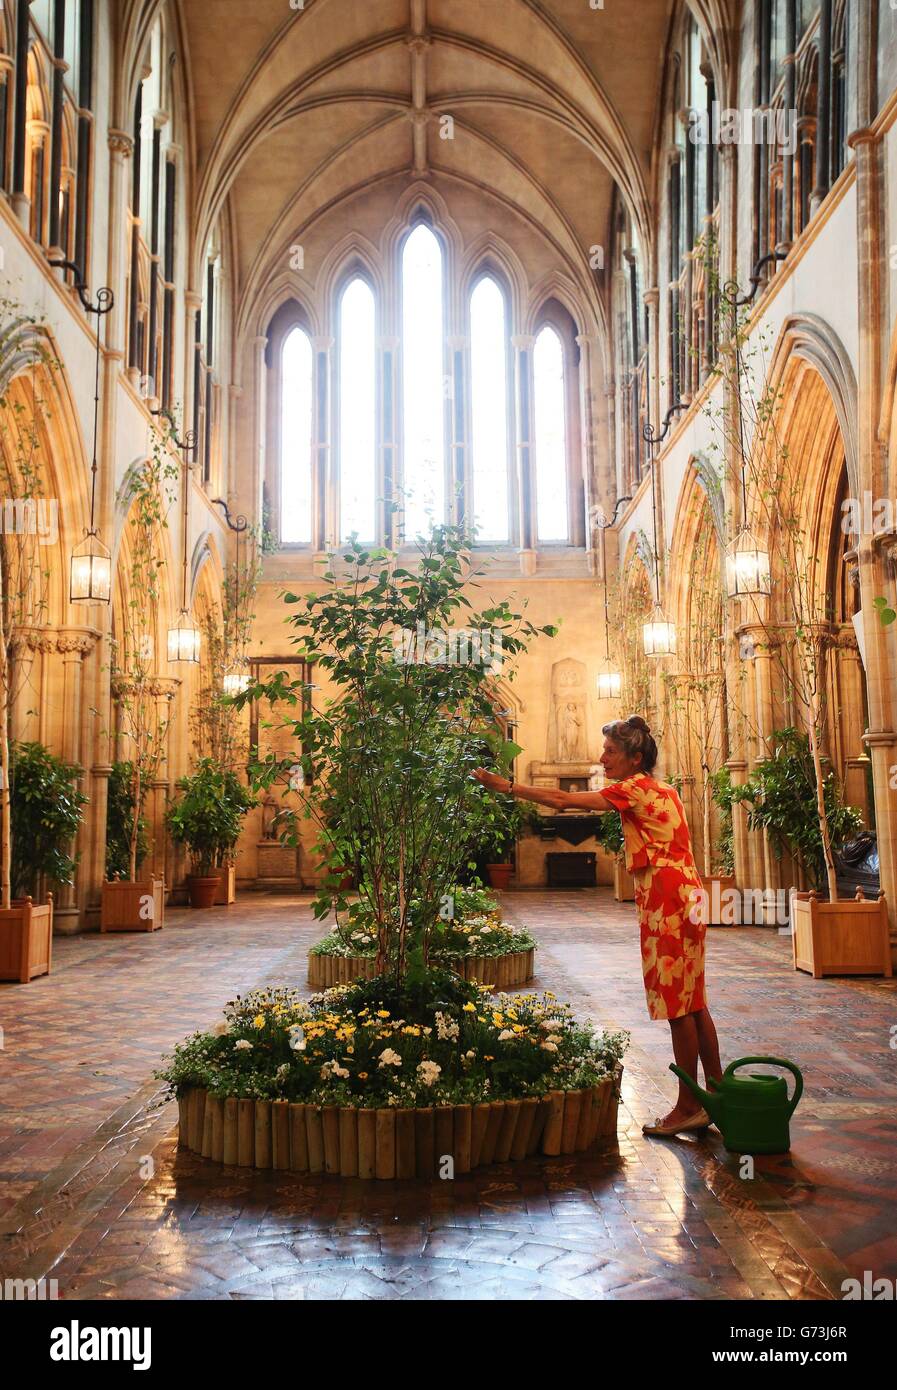 Ruth Kinsella, who has been in charge of flowers at Christ Church Cathedral for 21 years makes final preparations ahead of The Dublin Garden Festival which takes place at the Cathedral this weekend Friday 13th - Sunday 15th. Stock Photo